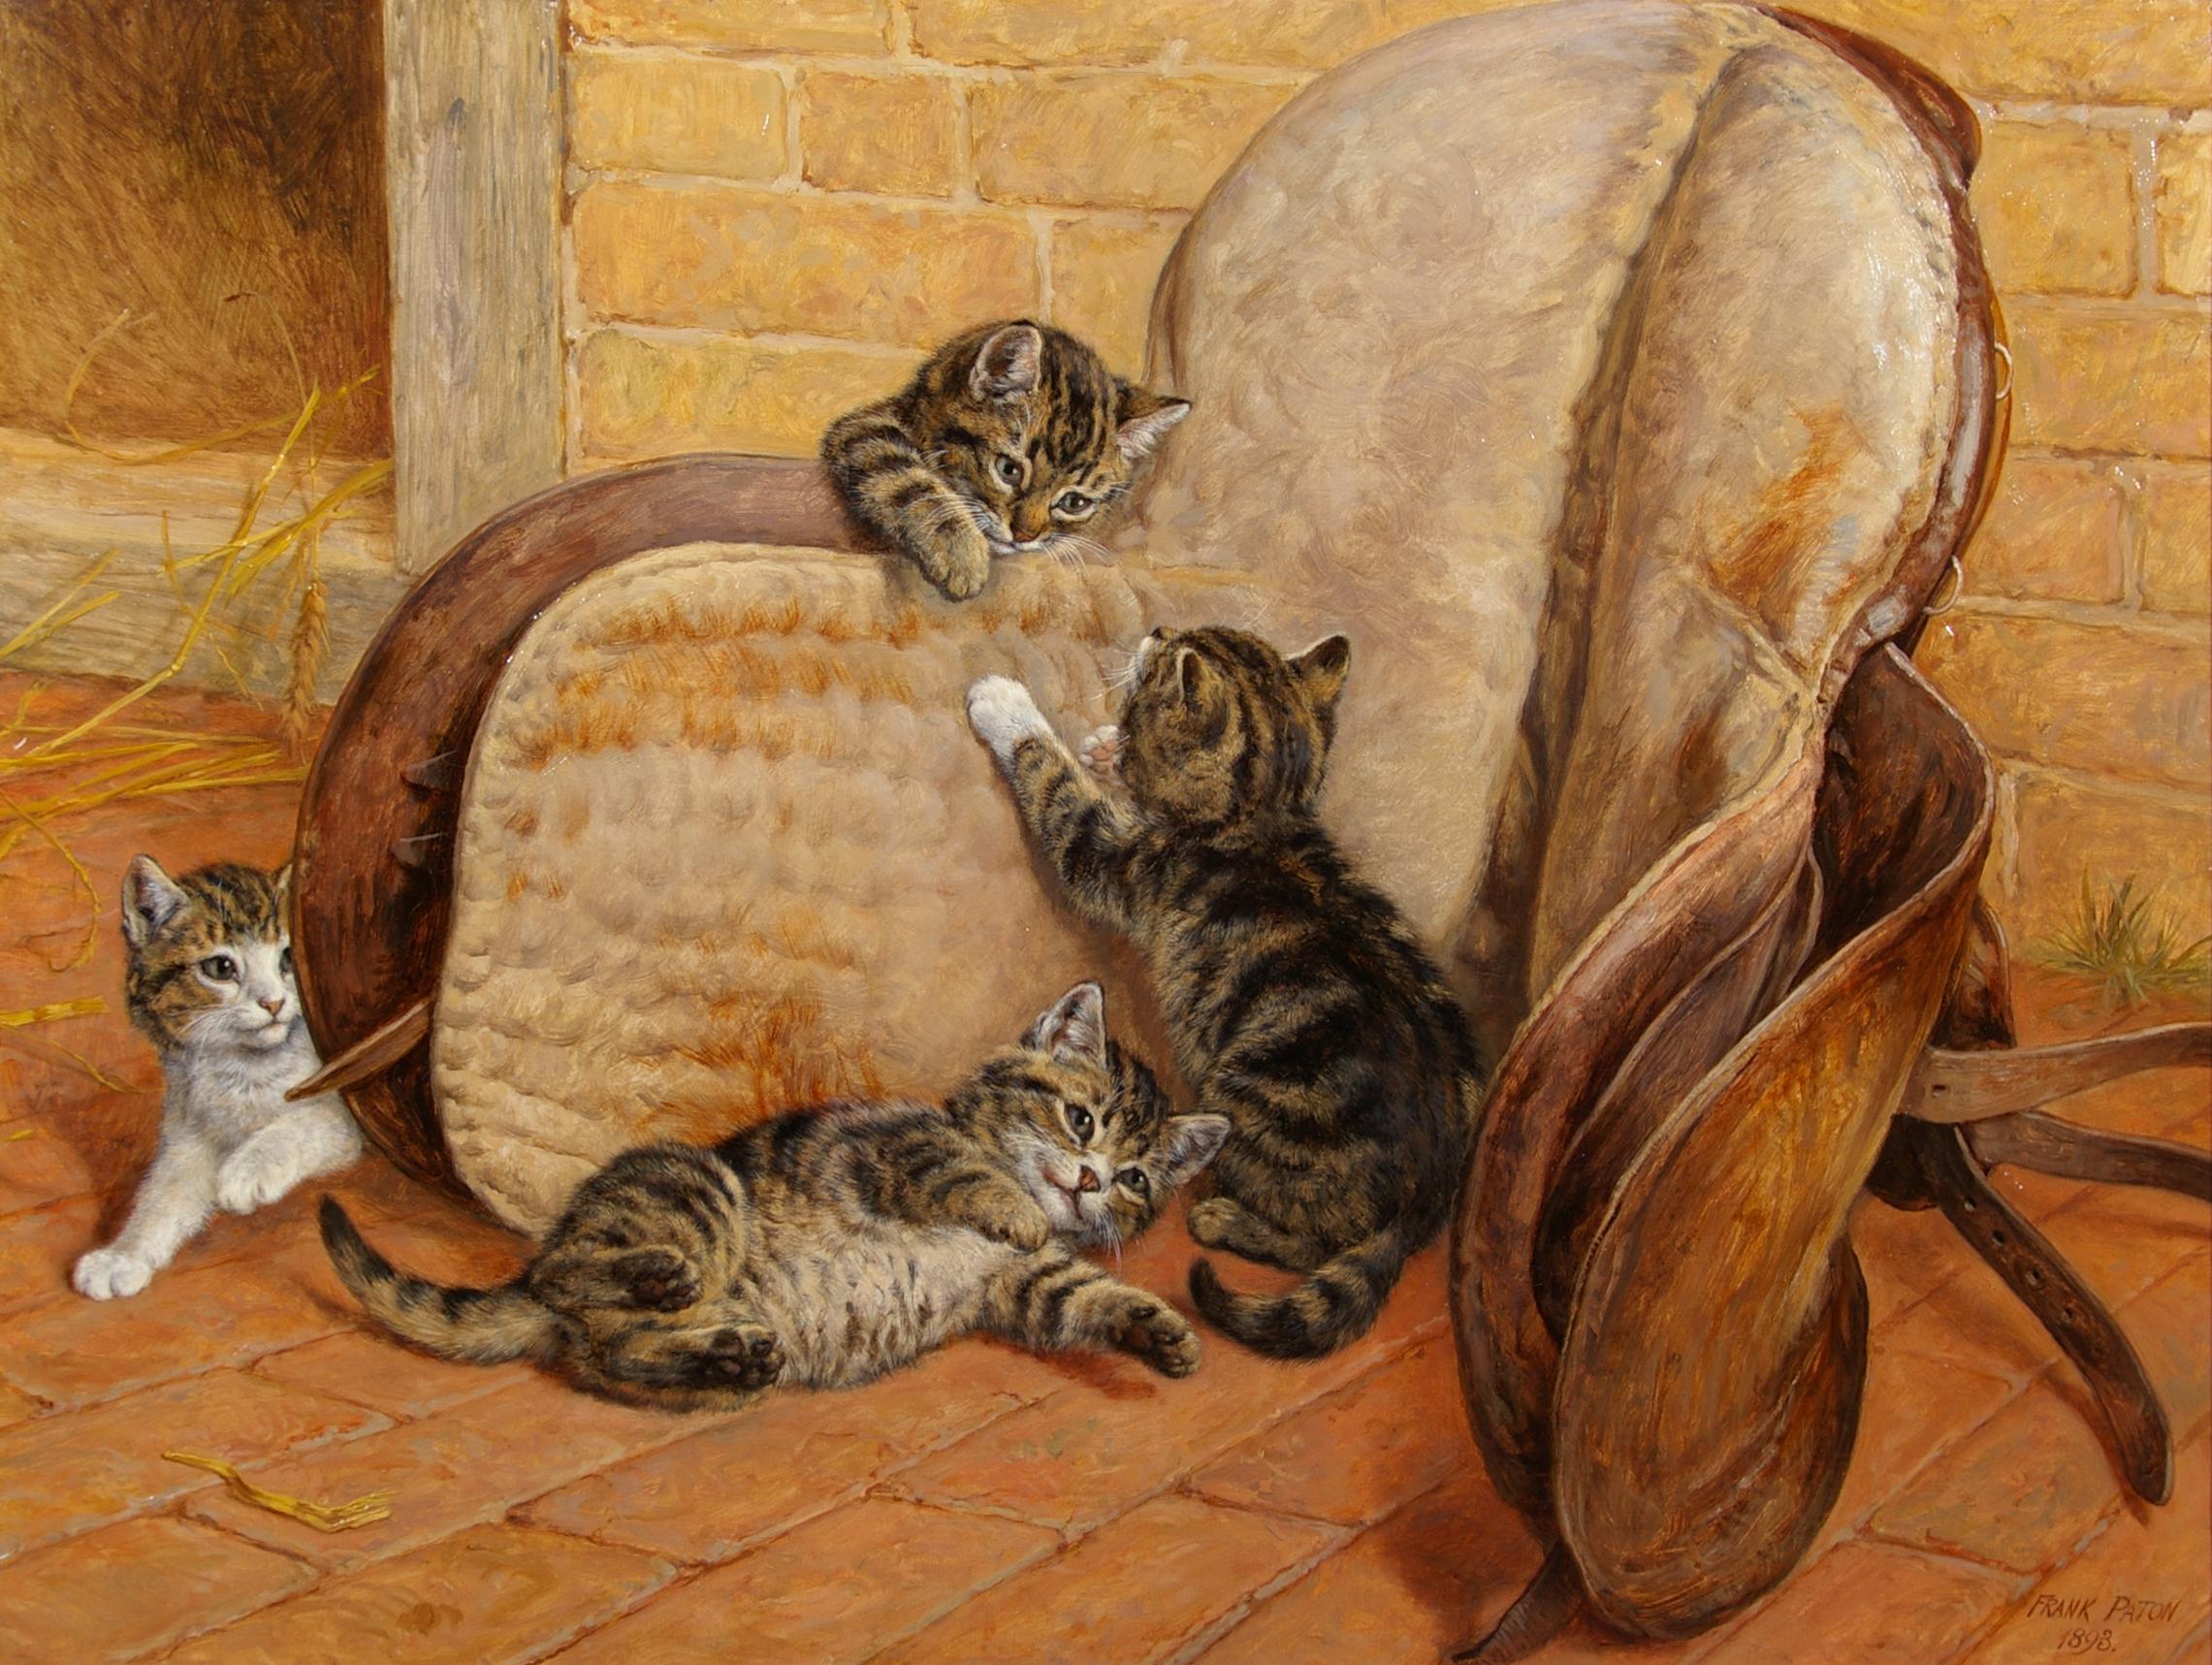 Kittens Playing Around a Saddle - Painting by Frank Paton